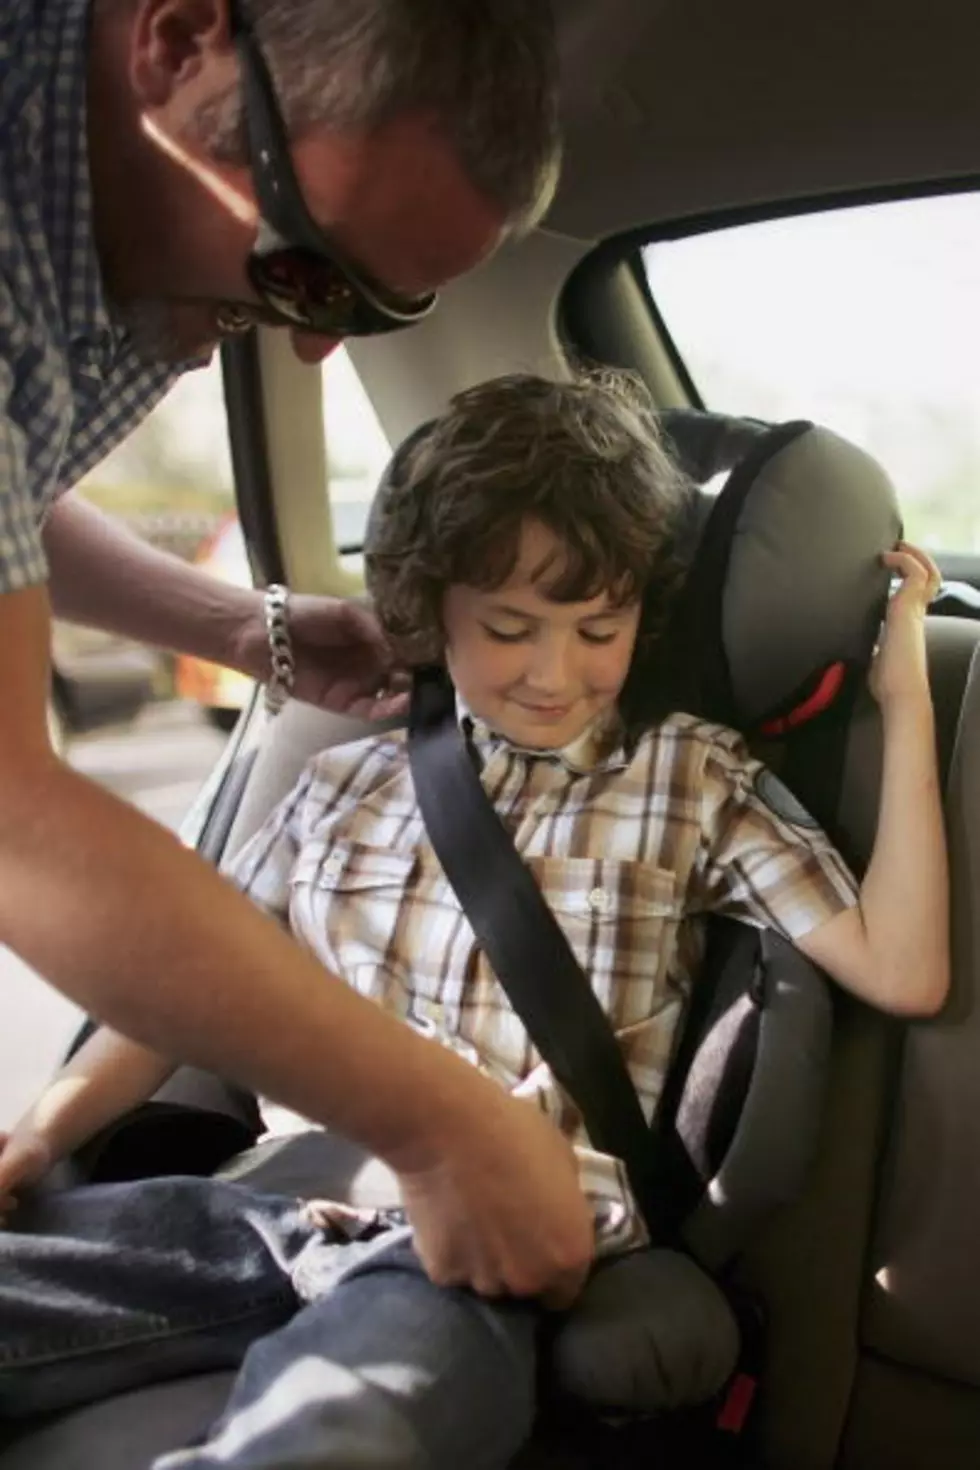 Study: 9 in 10 parents move child from booster seat too soon